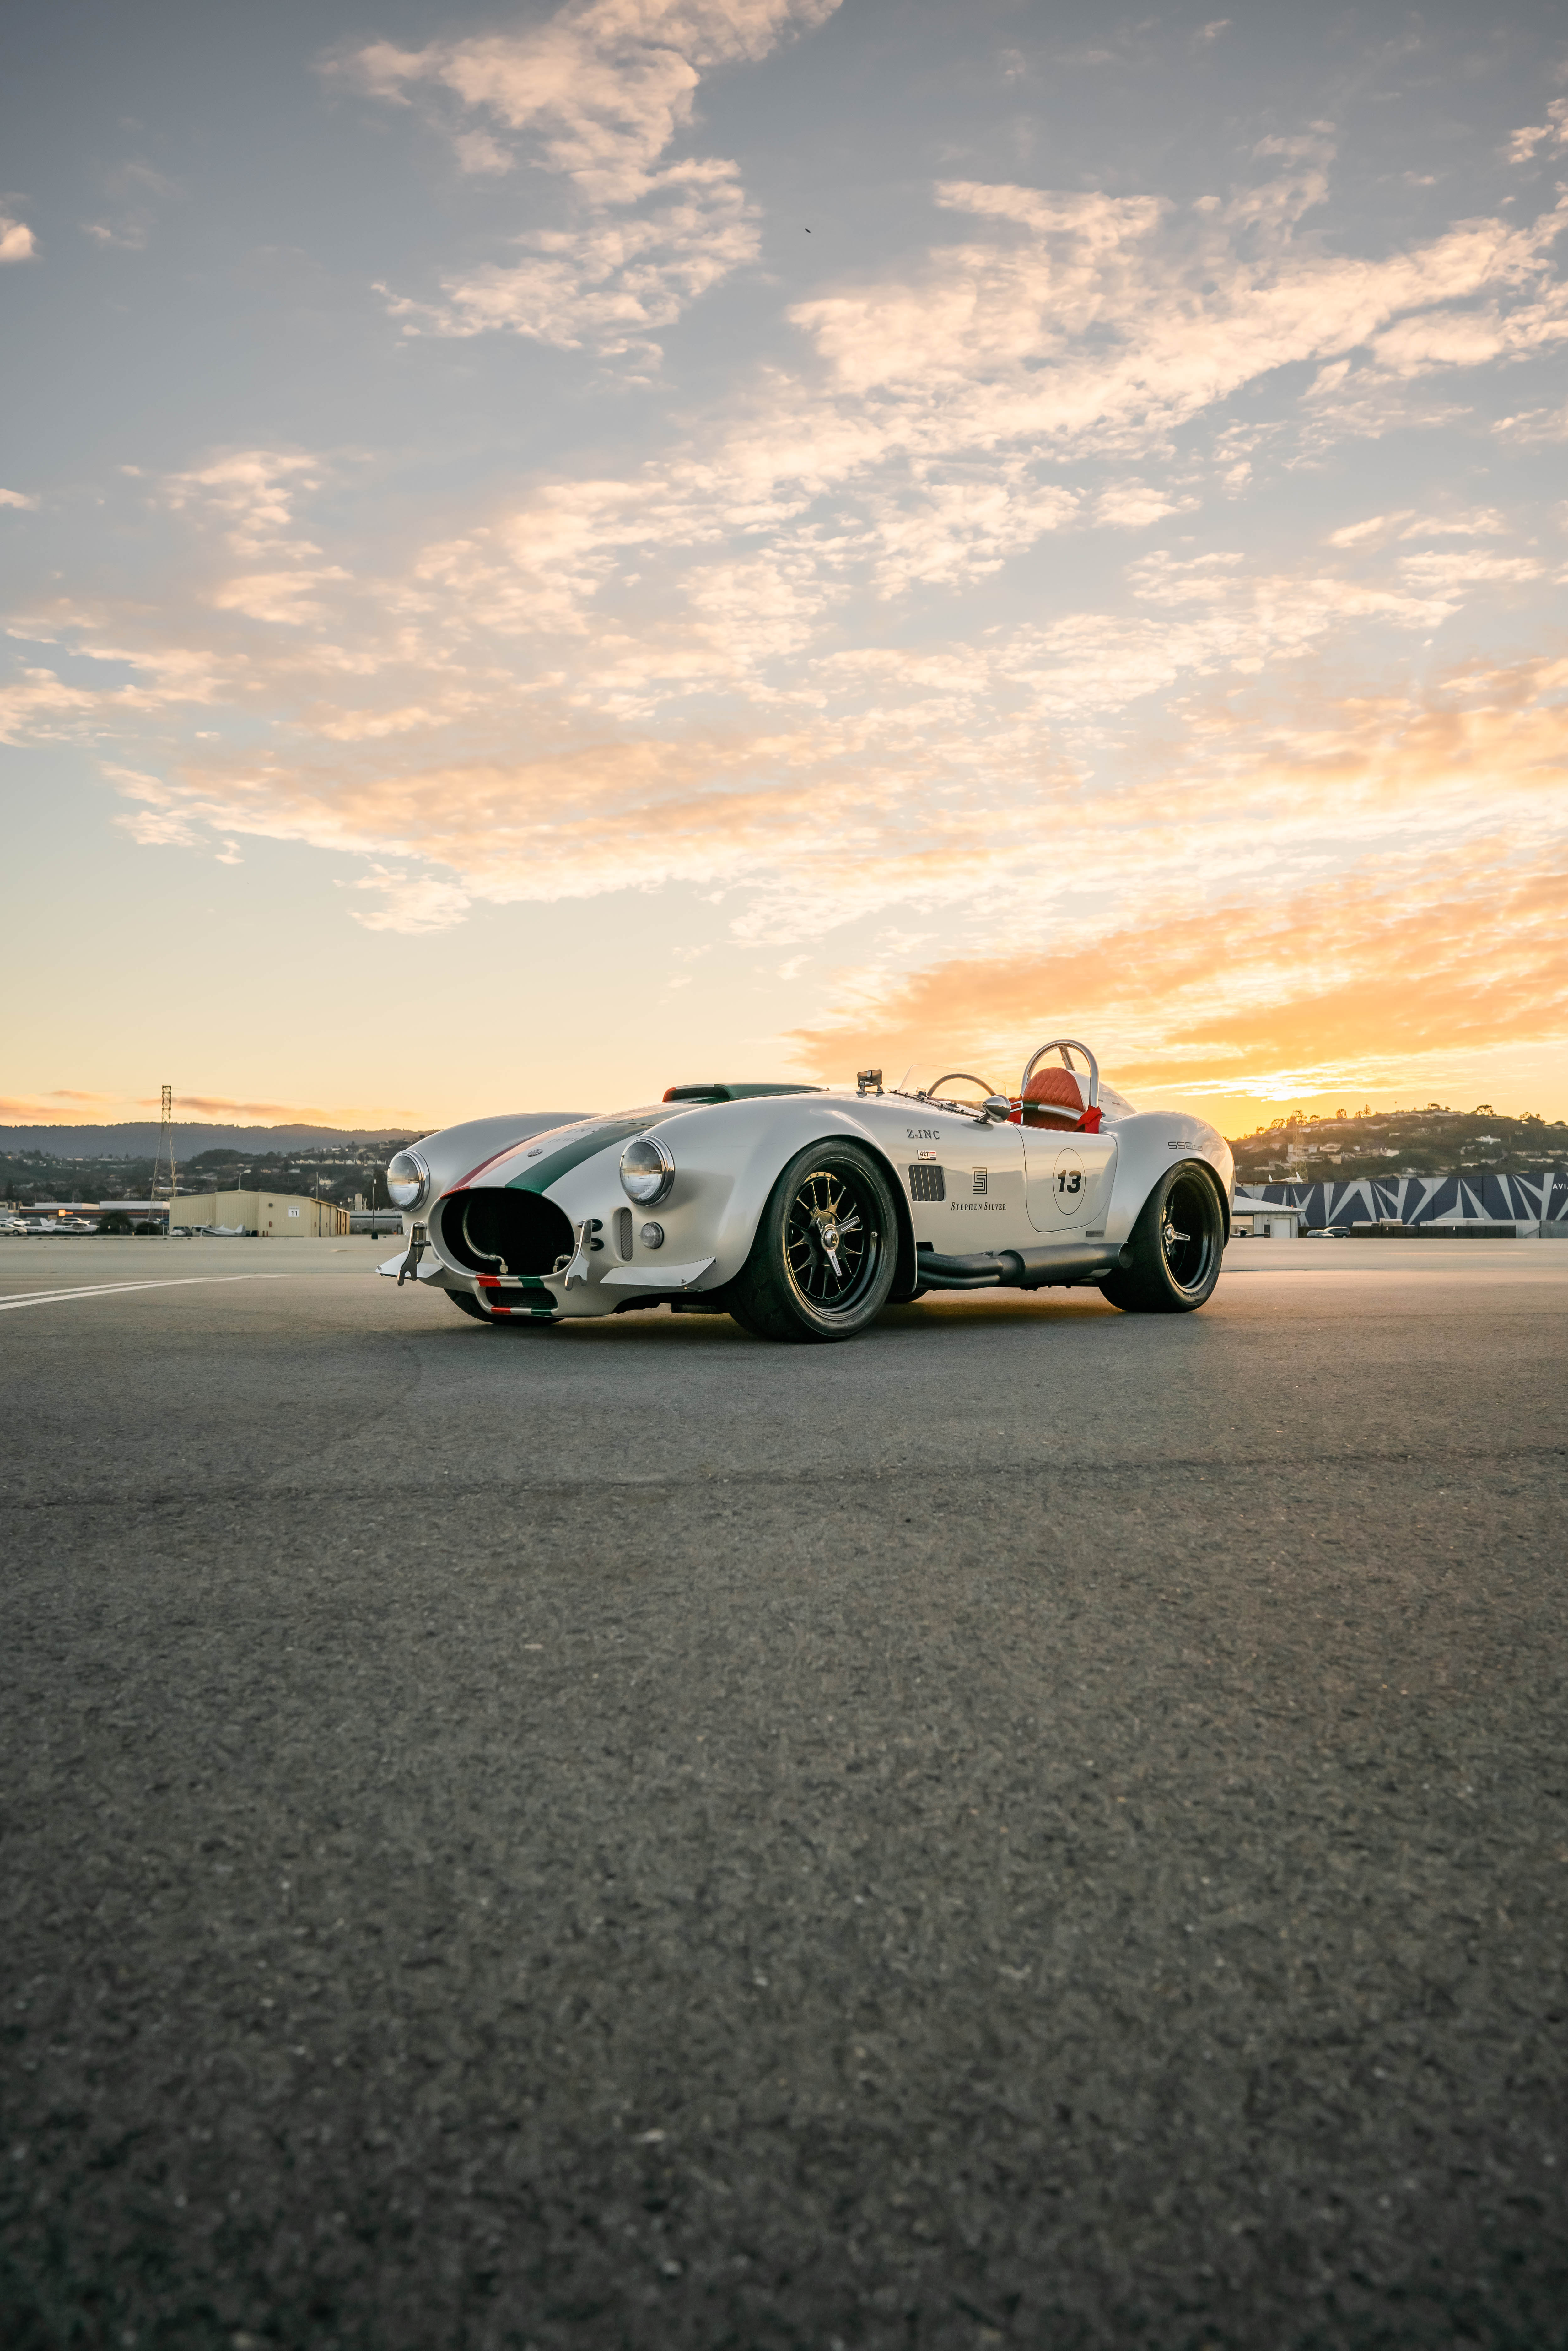 Fastest Superformance Roadster in the World – to be Auctioned at Barrett-Jackson in Scottsdale